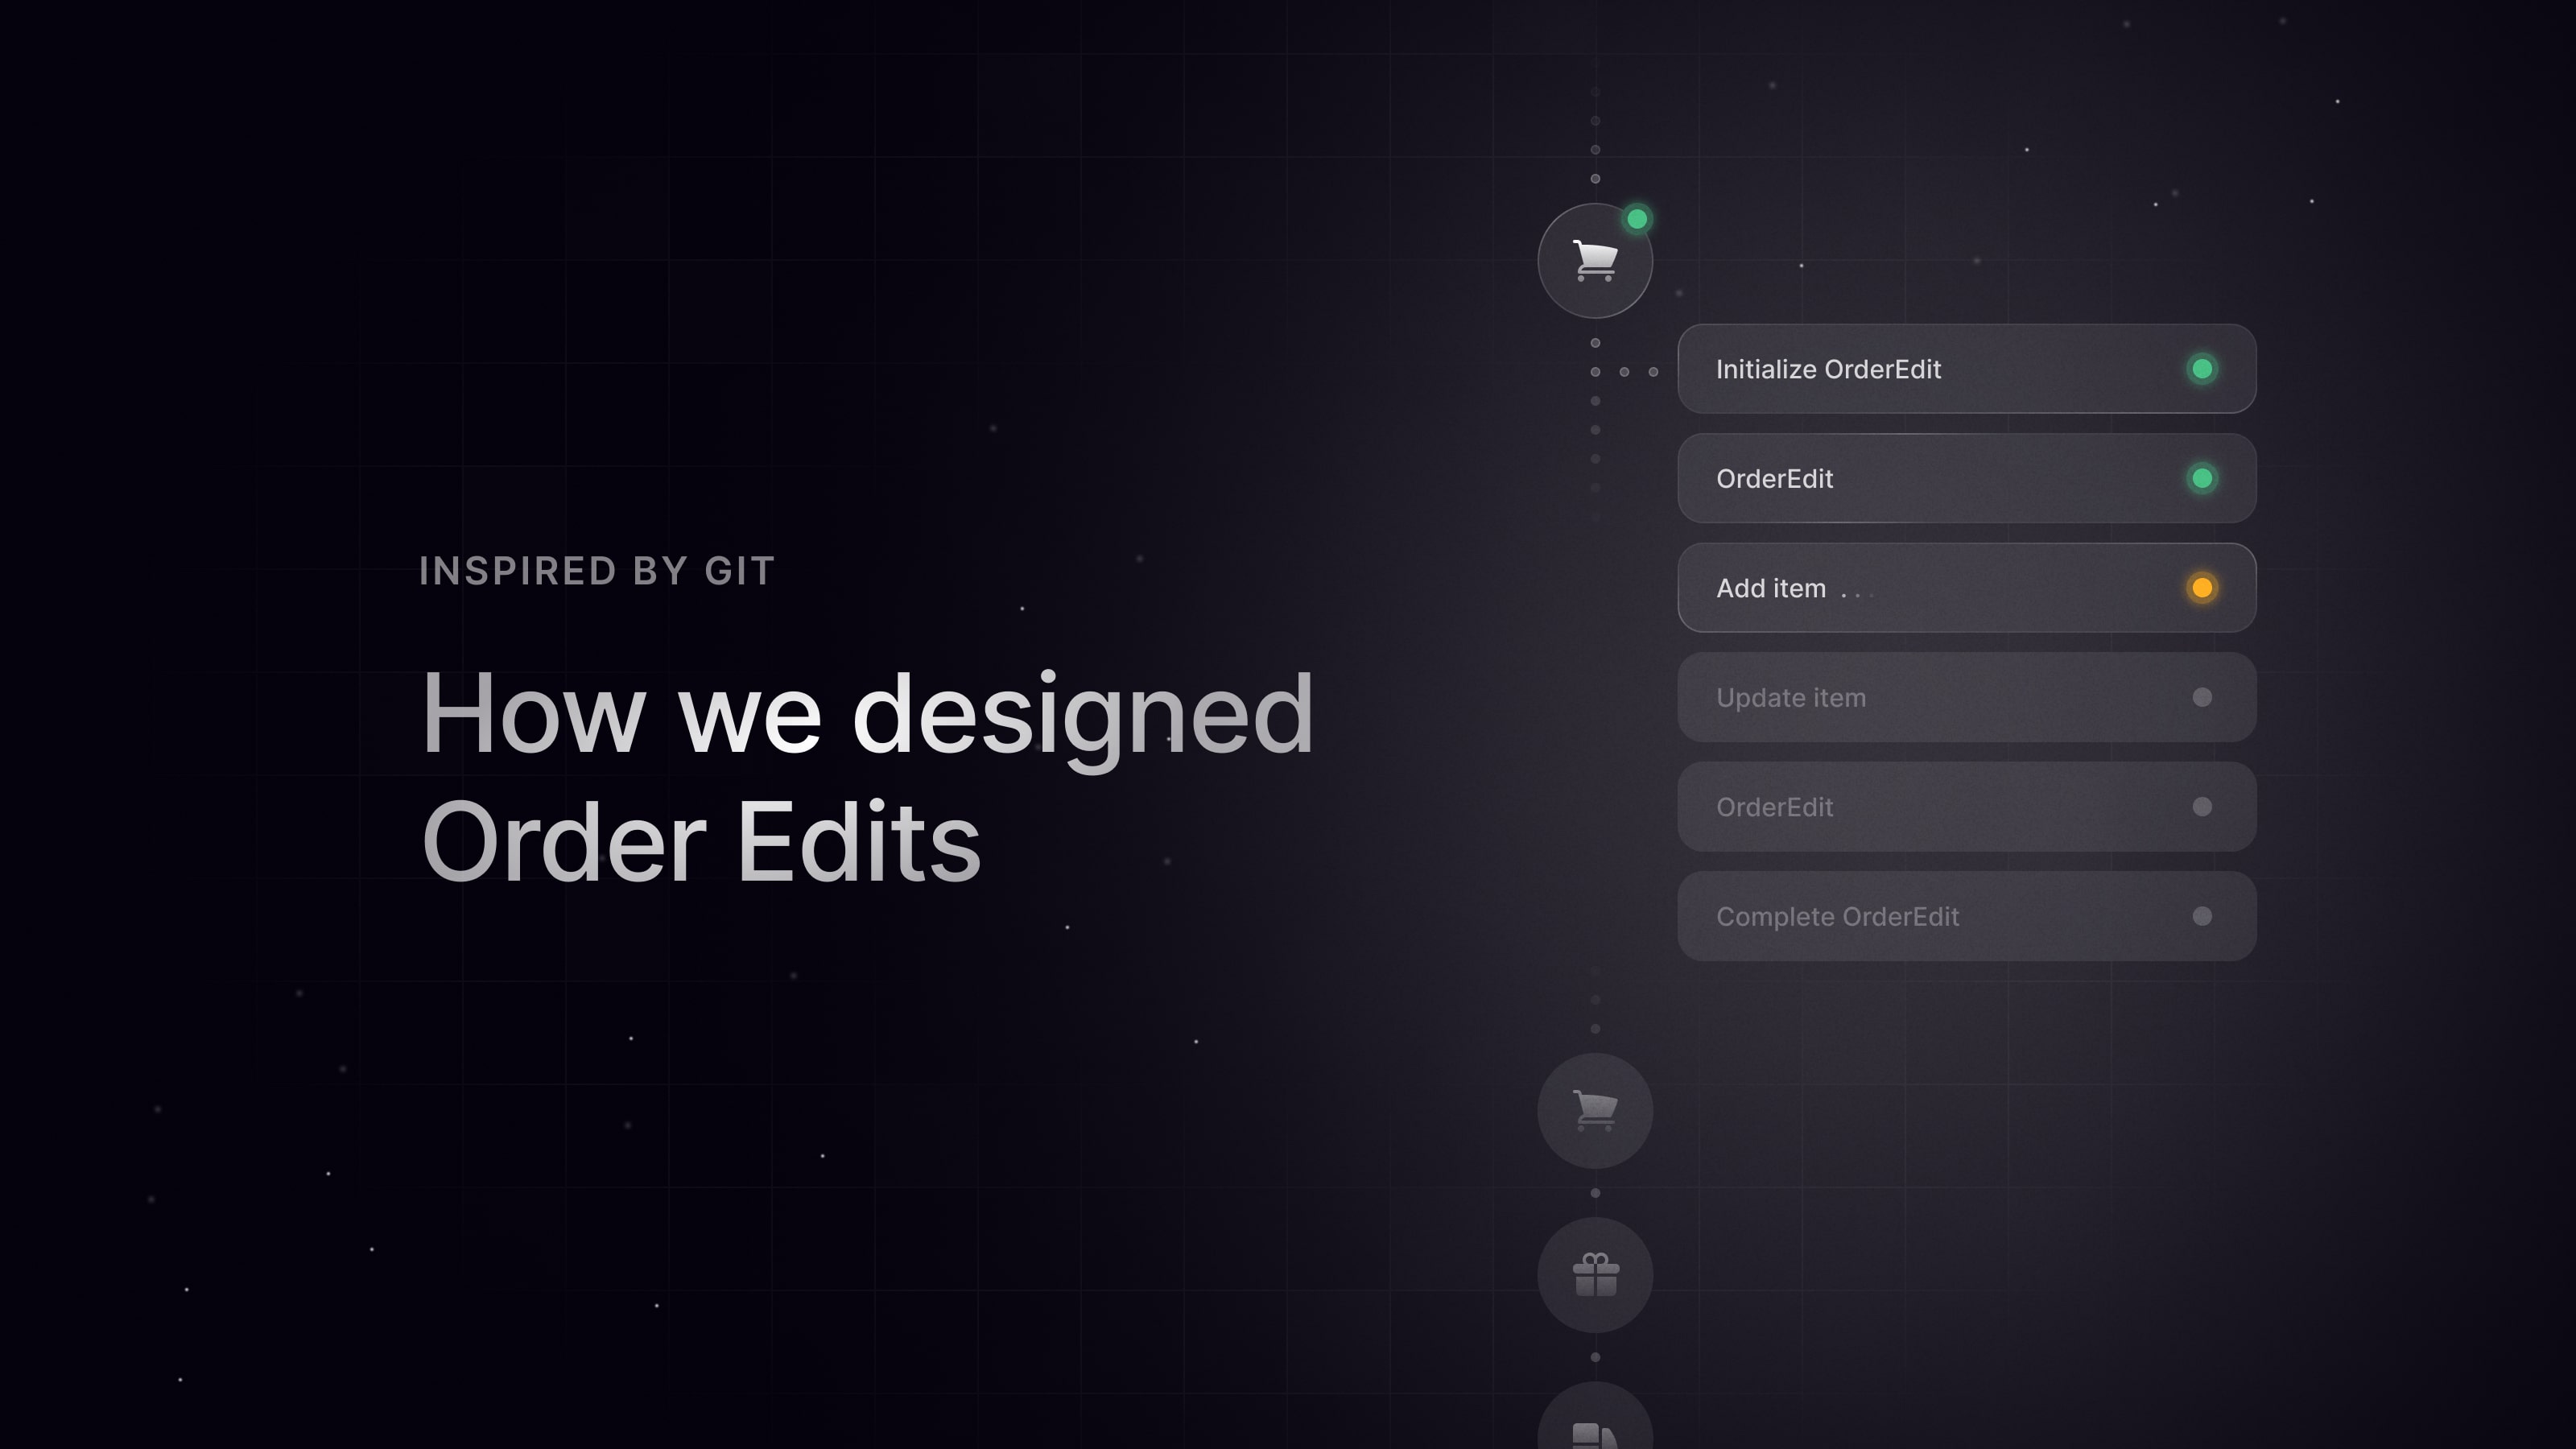 Inspired by Git: How we Designed our Order-Editing Feature